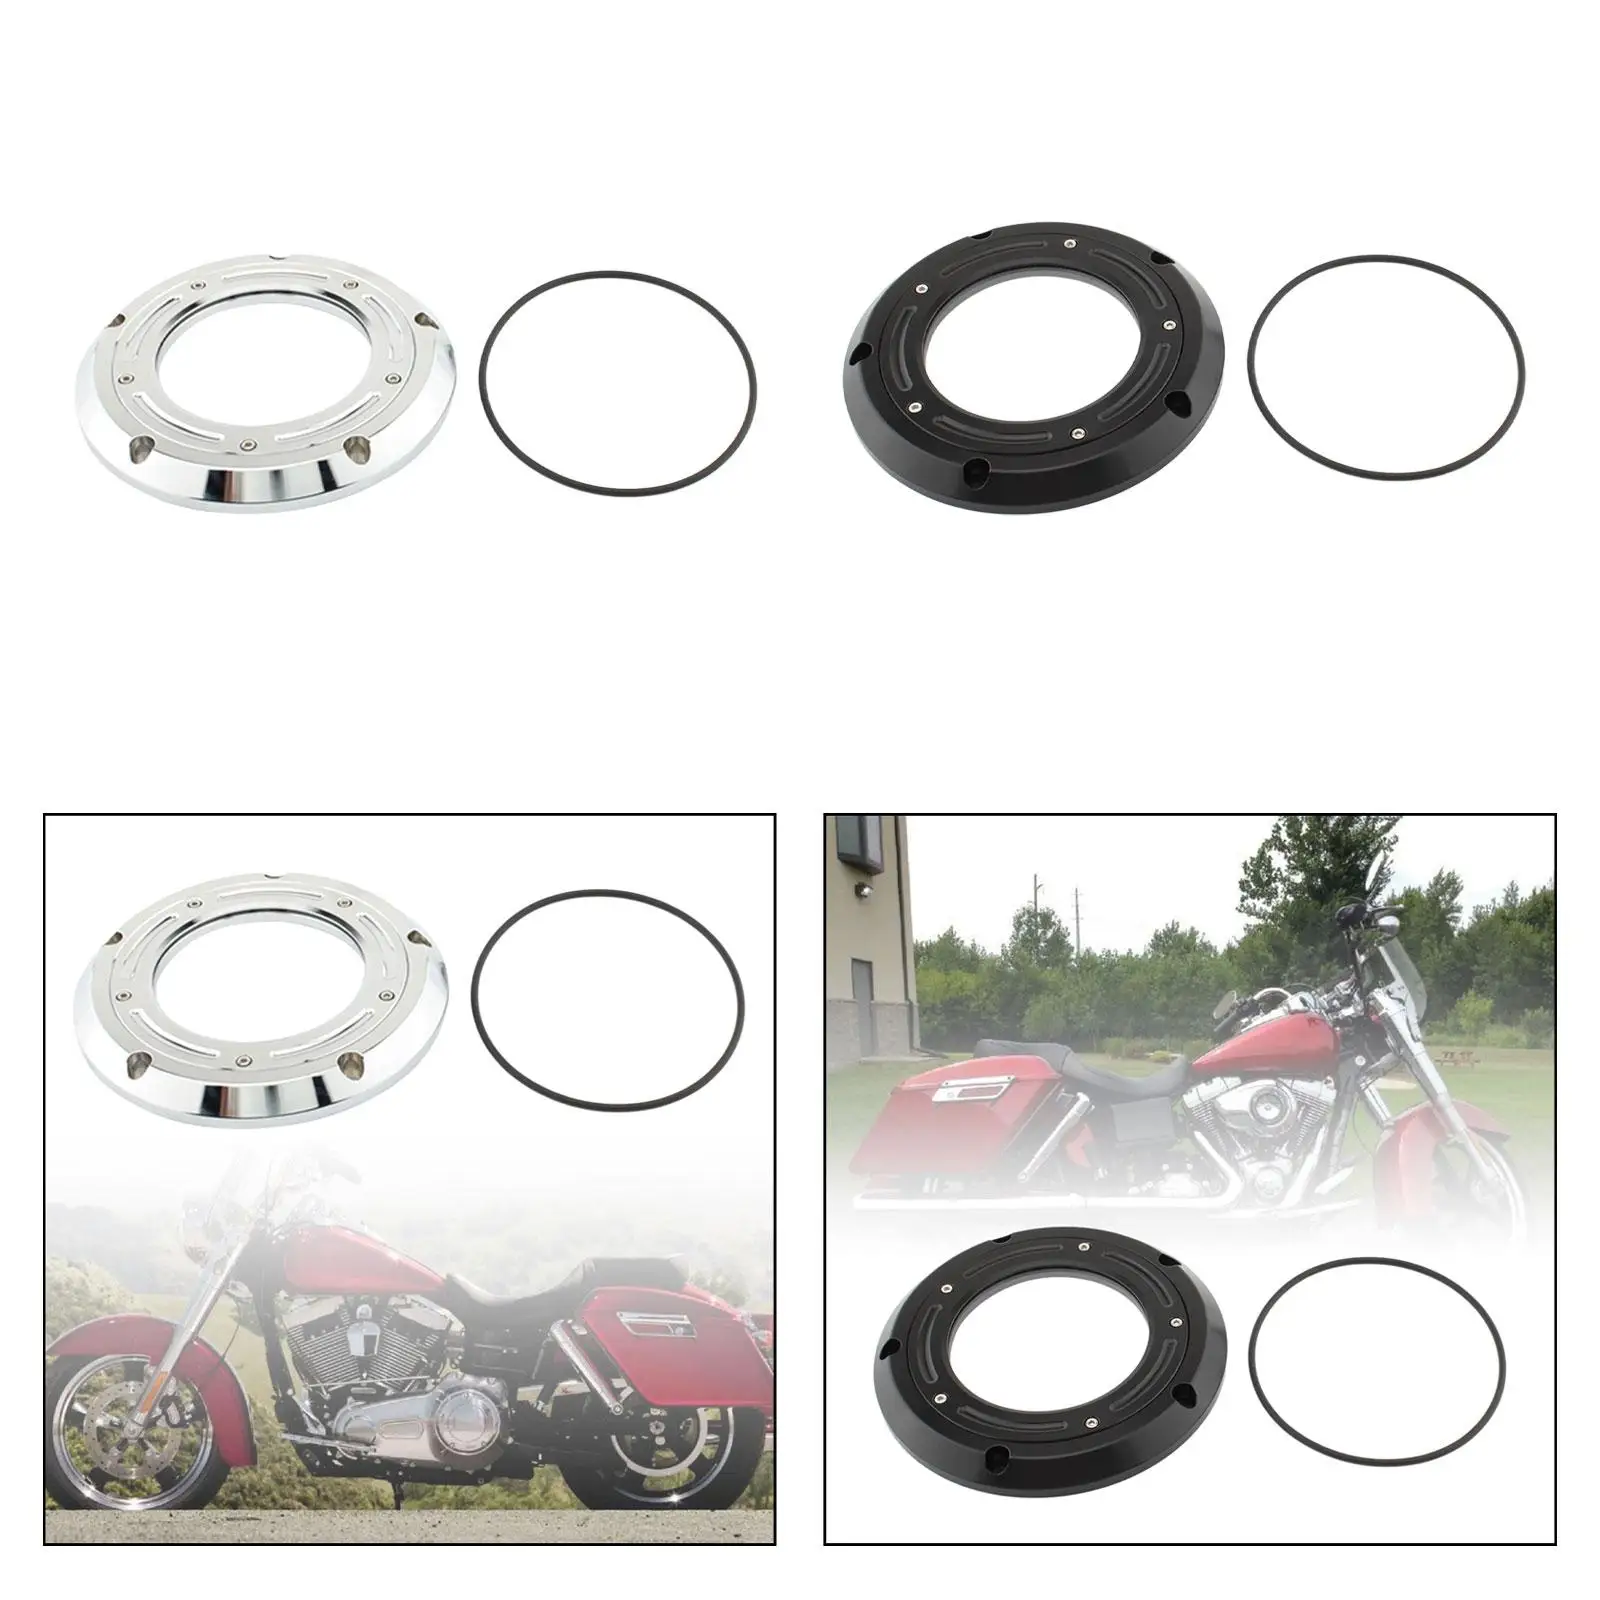 Motorcycle Clutch Derby Cover Accessories for Harley-davidson Fxdc Dyna Super Glide Custom Flhtcutg Tri Glide Ultra Classic